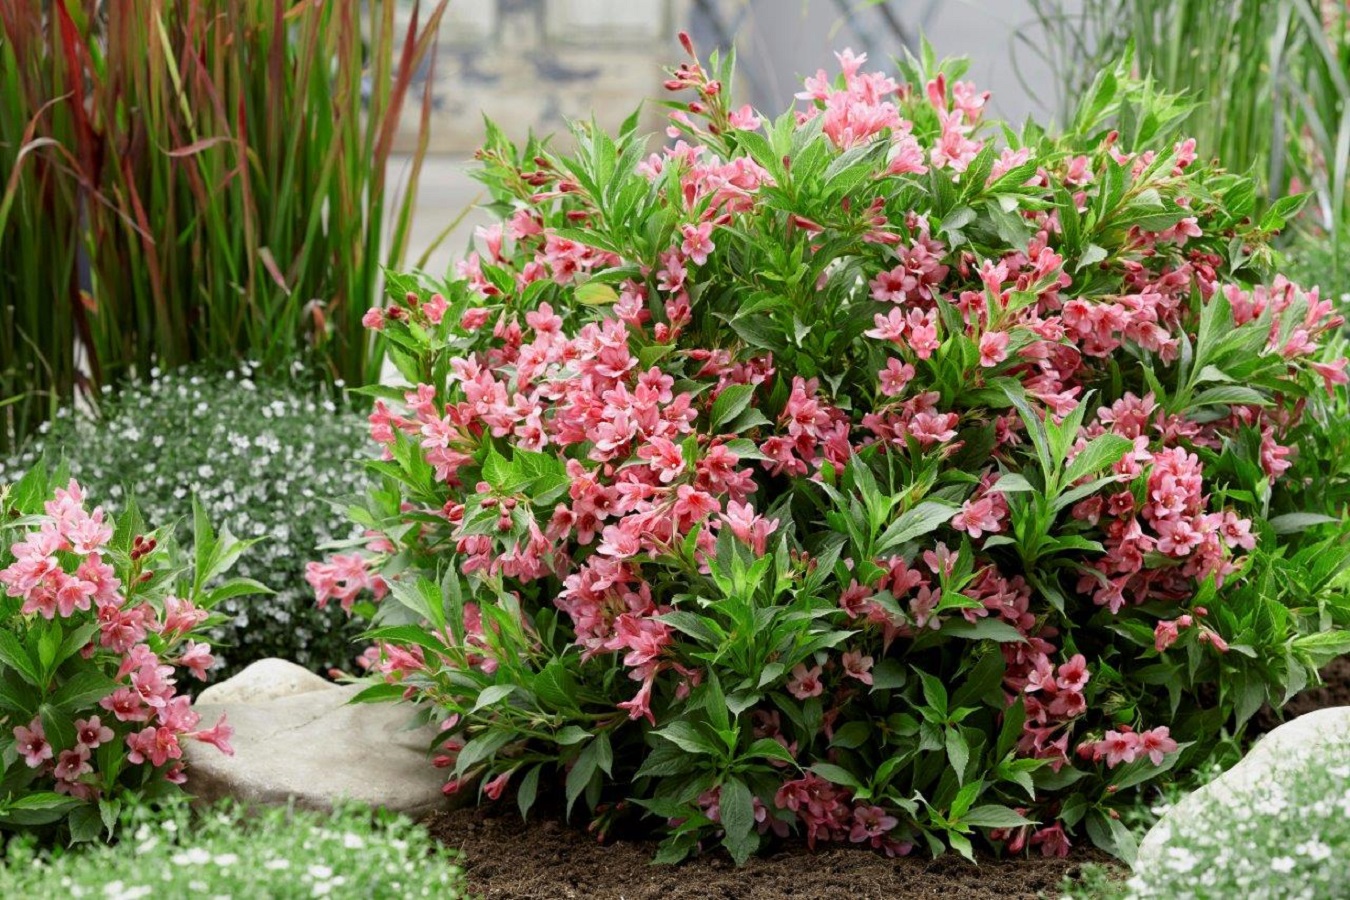 Weigela Plant Care - All About Basic Needs, Varieties and Pruning